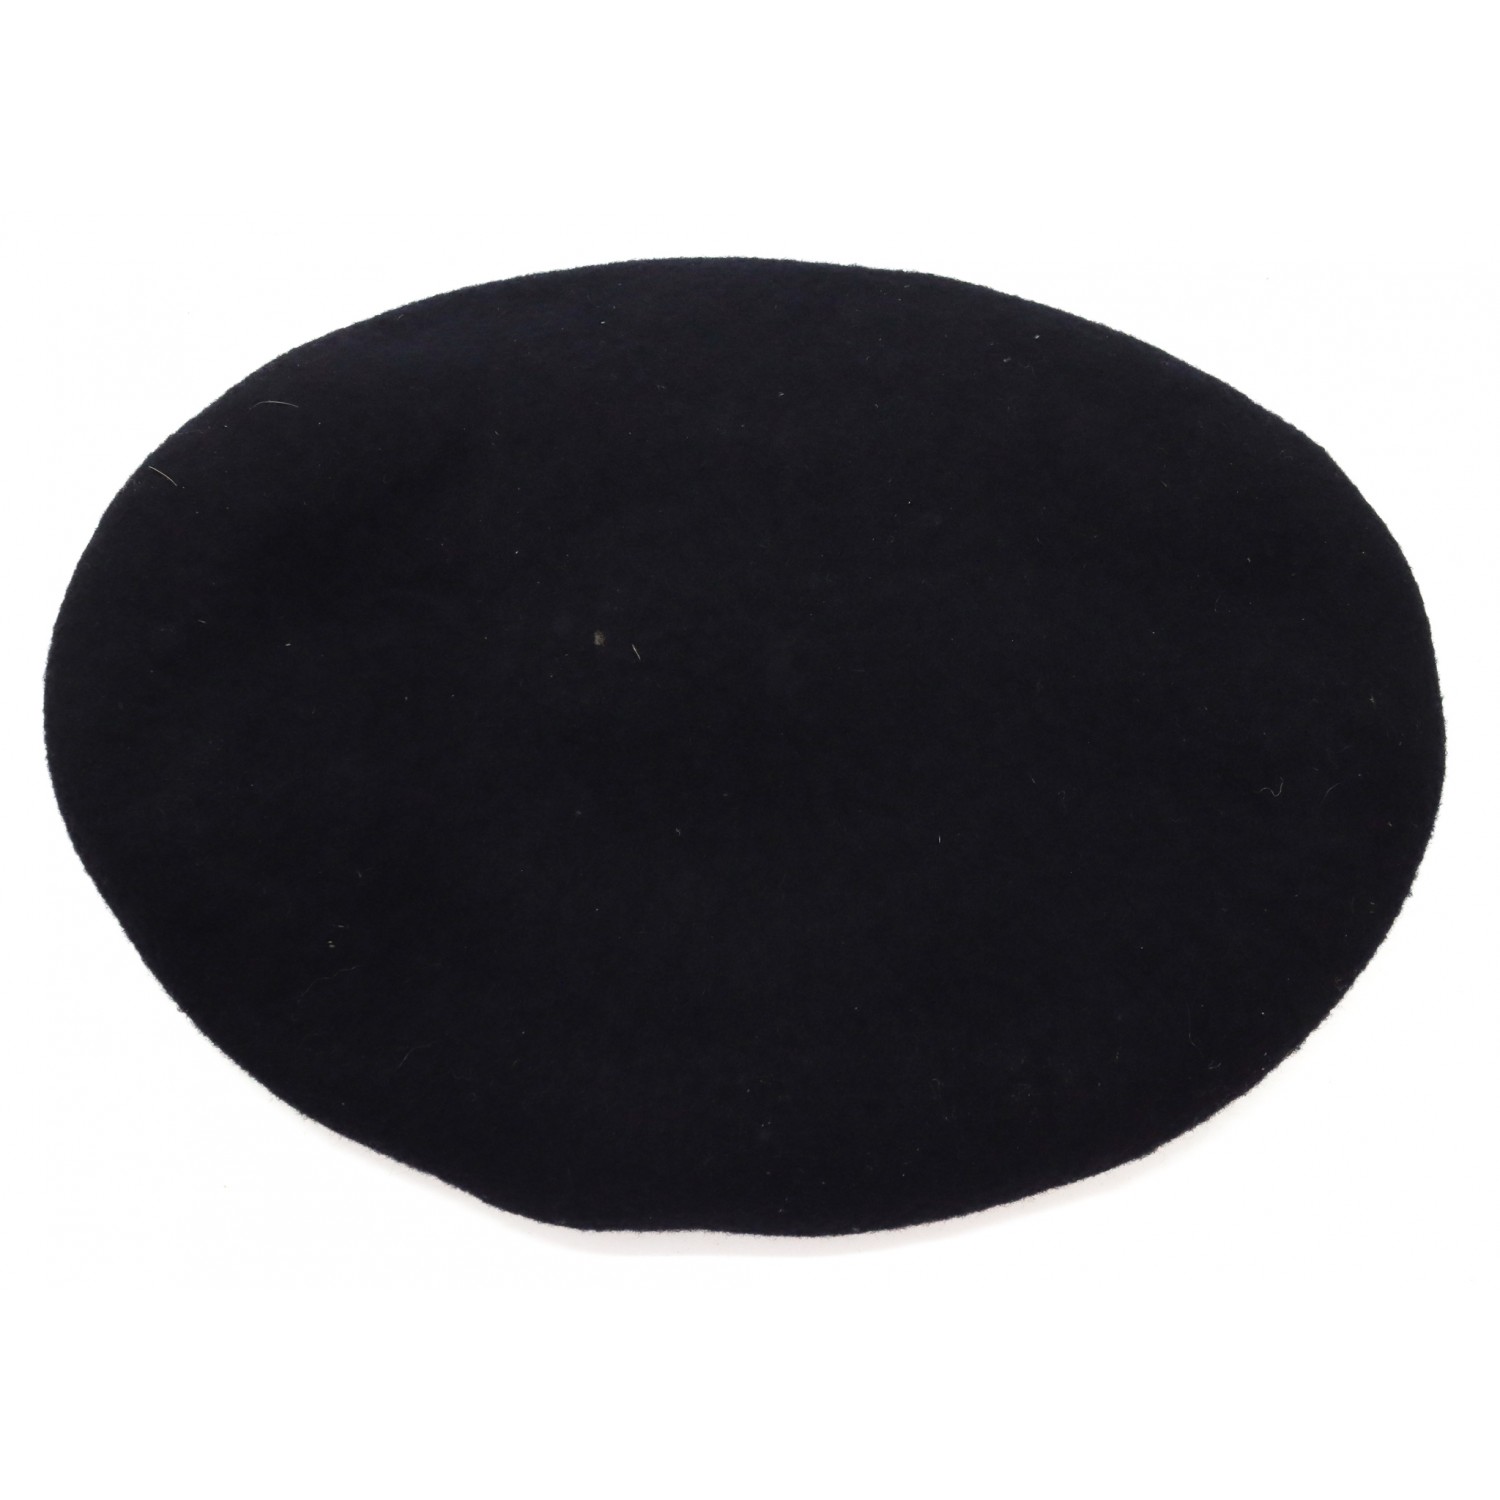 City of London Police Tactical Firearms Group Beret